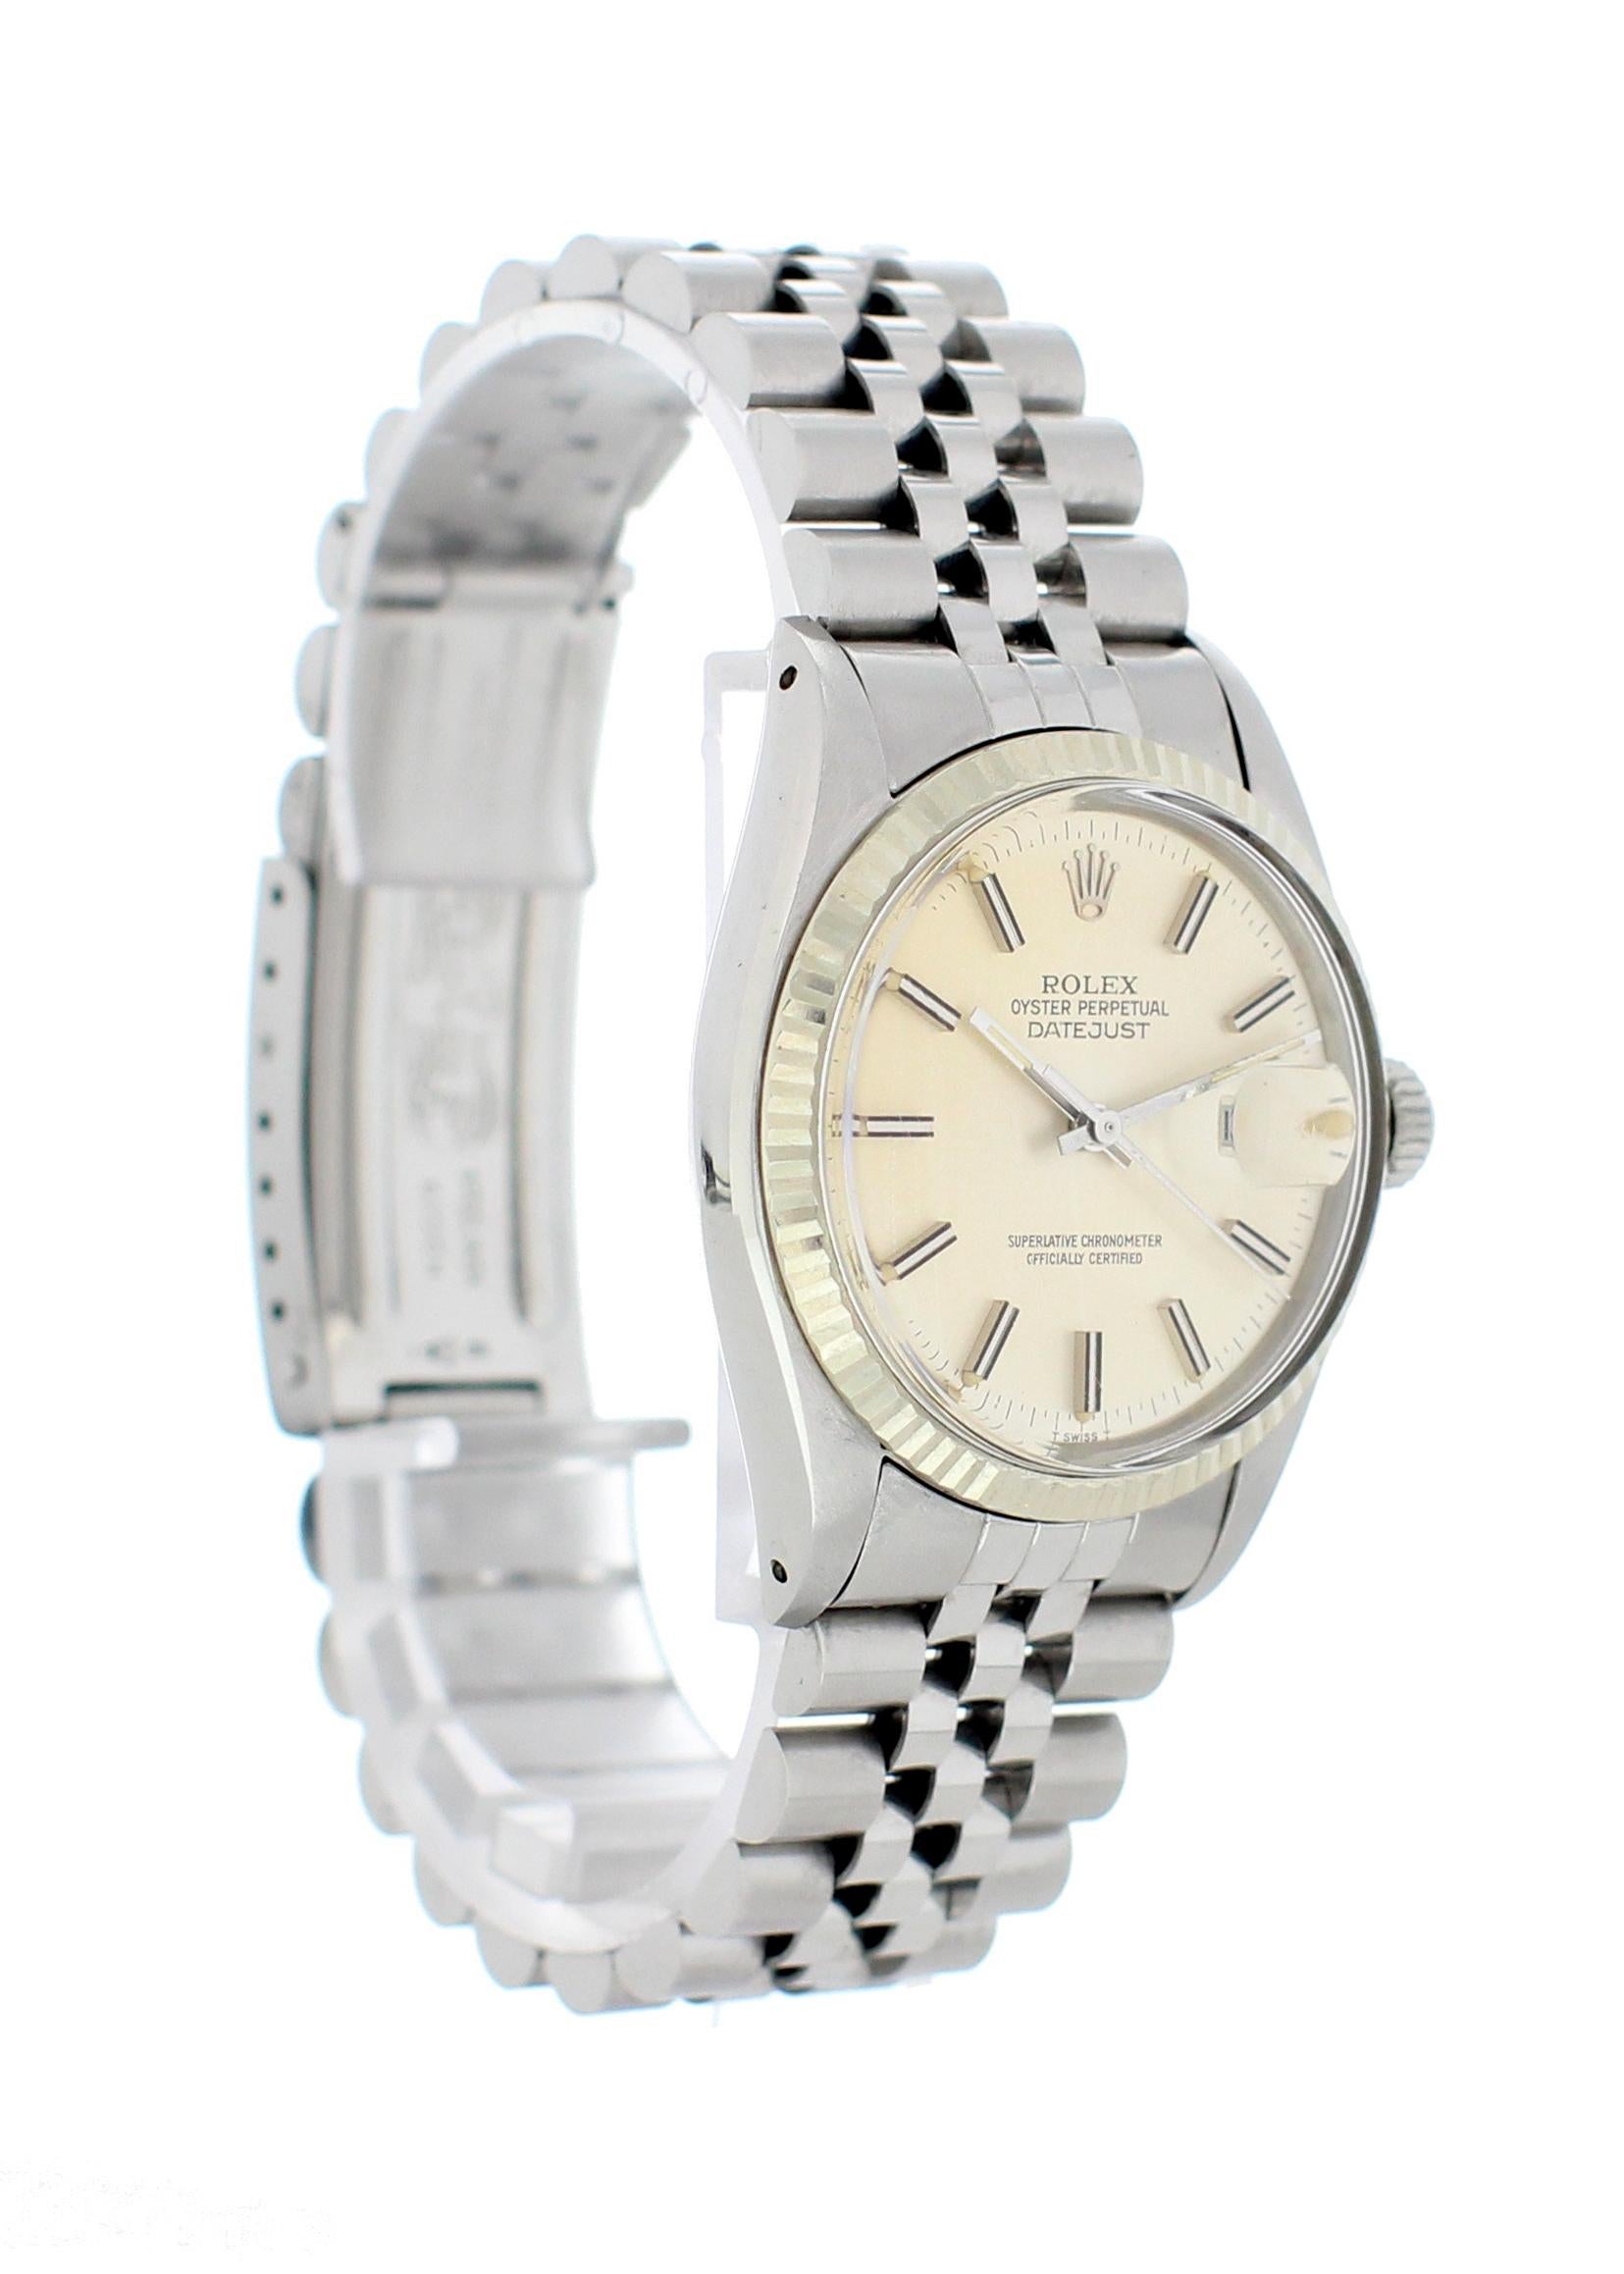 Rolex Oyster Perpetual Datejust 16014 Men's Watch In Excellent Condition For Sale In New York, NY